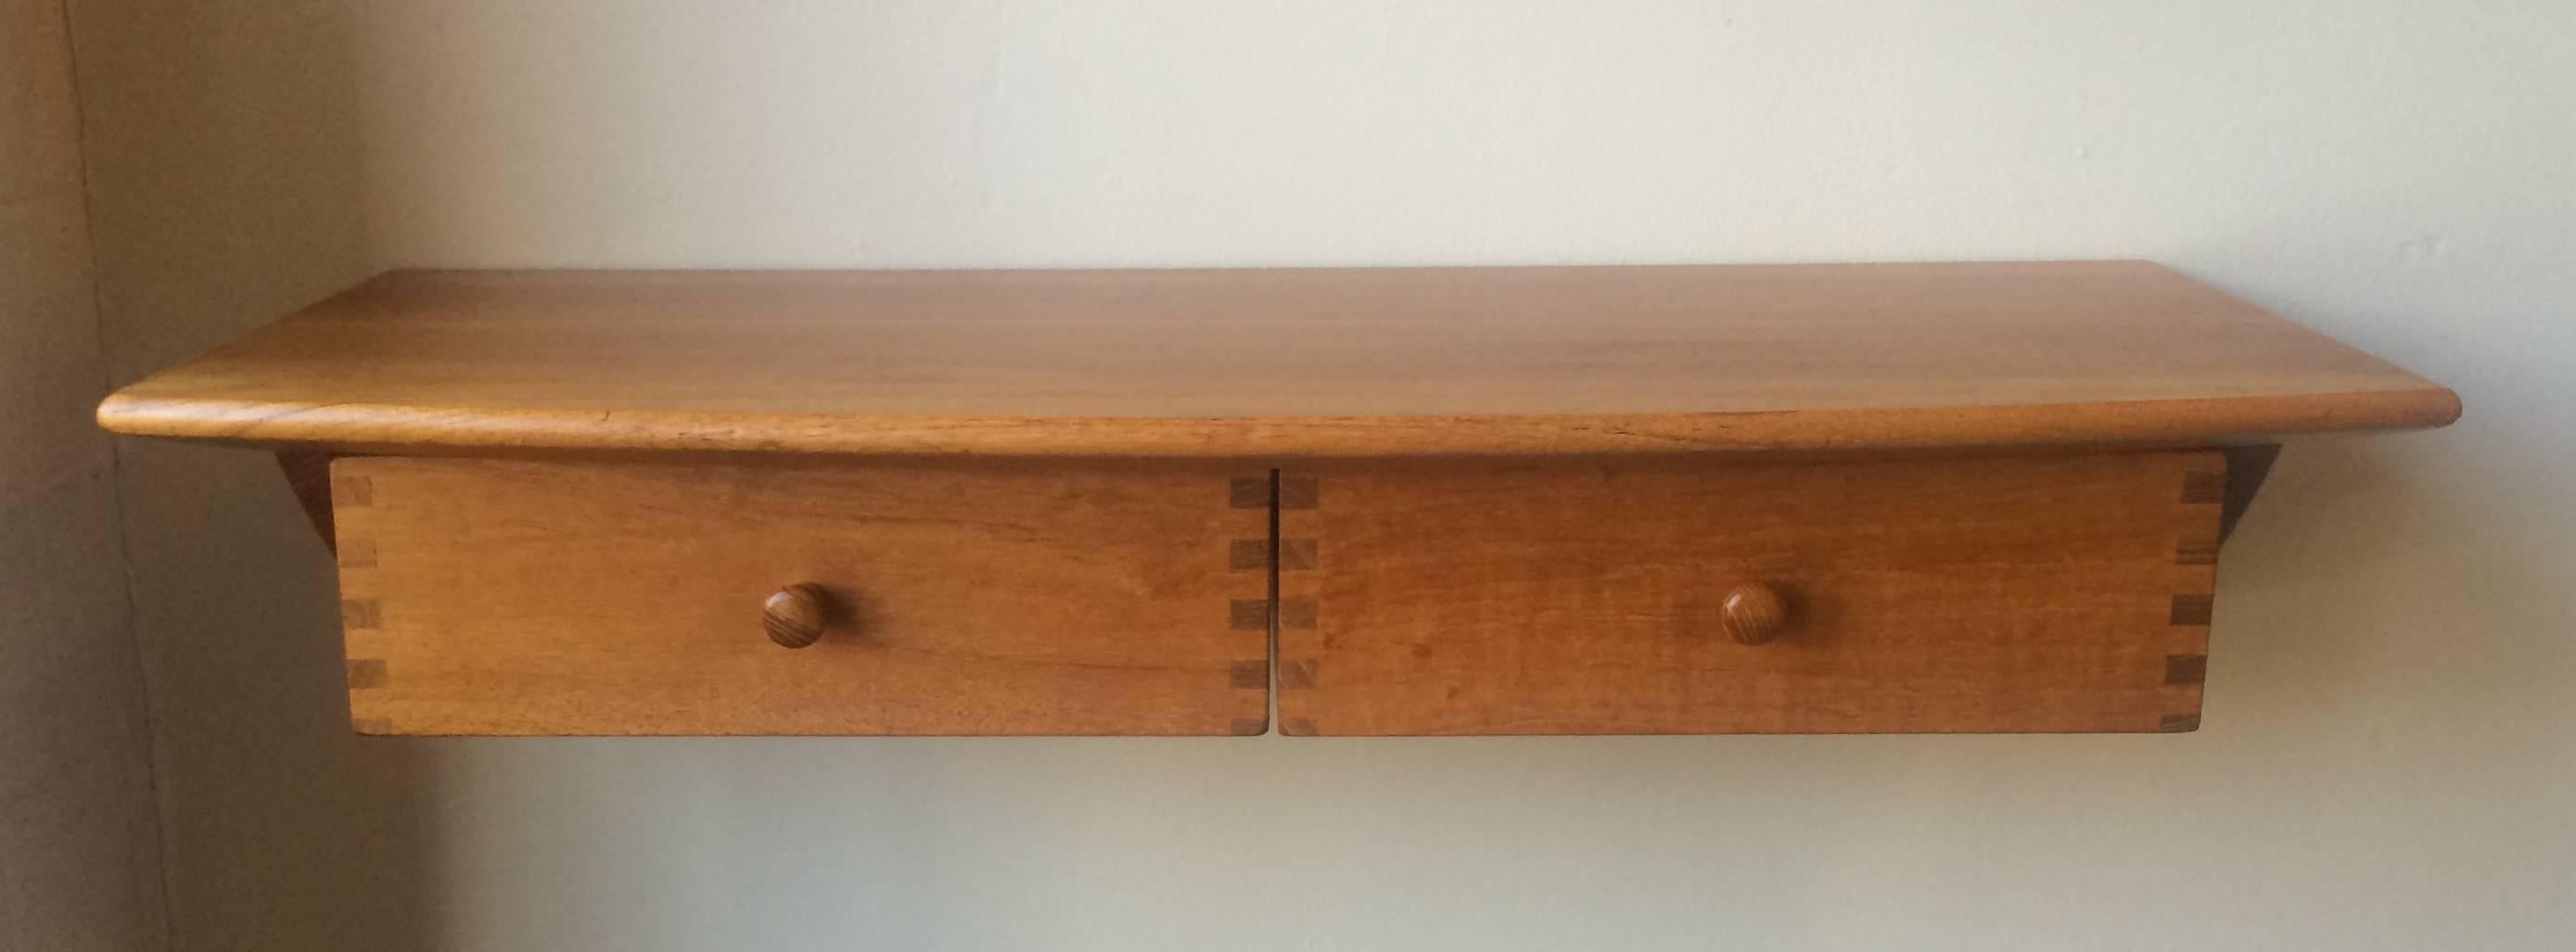 Solid teak construction wall console with a crescent shaped top and two drawers with finger joinery, a simple yet elegant design.